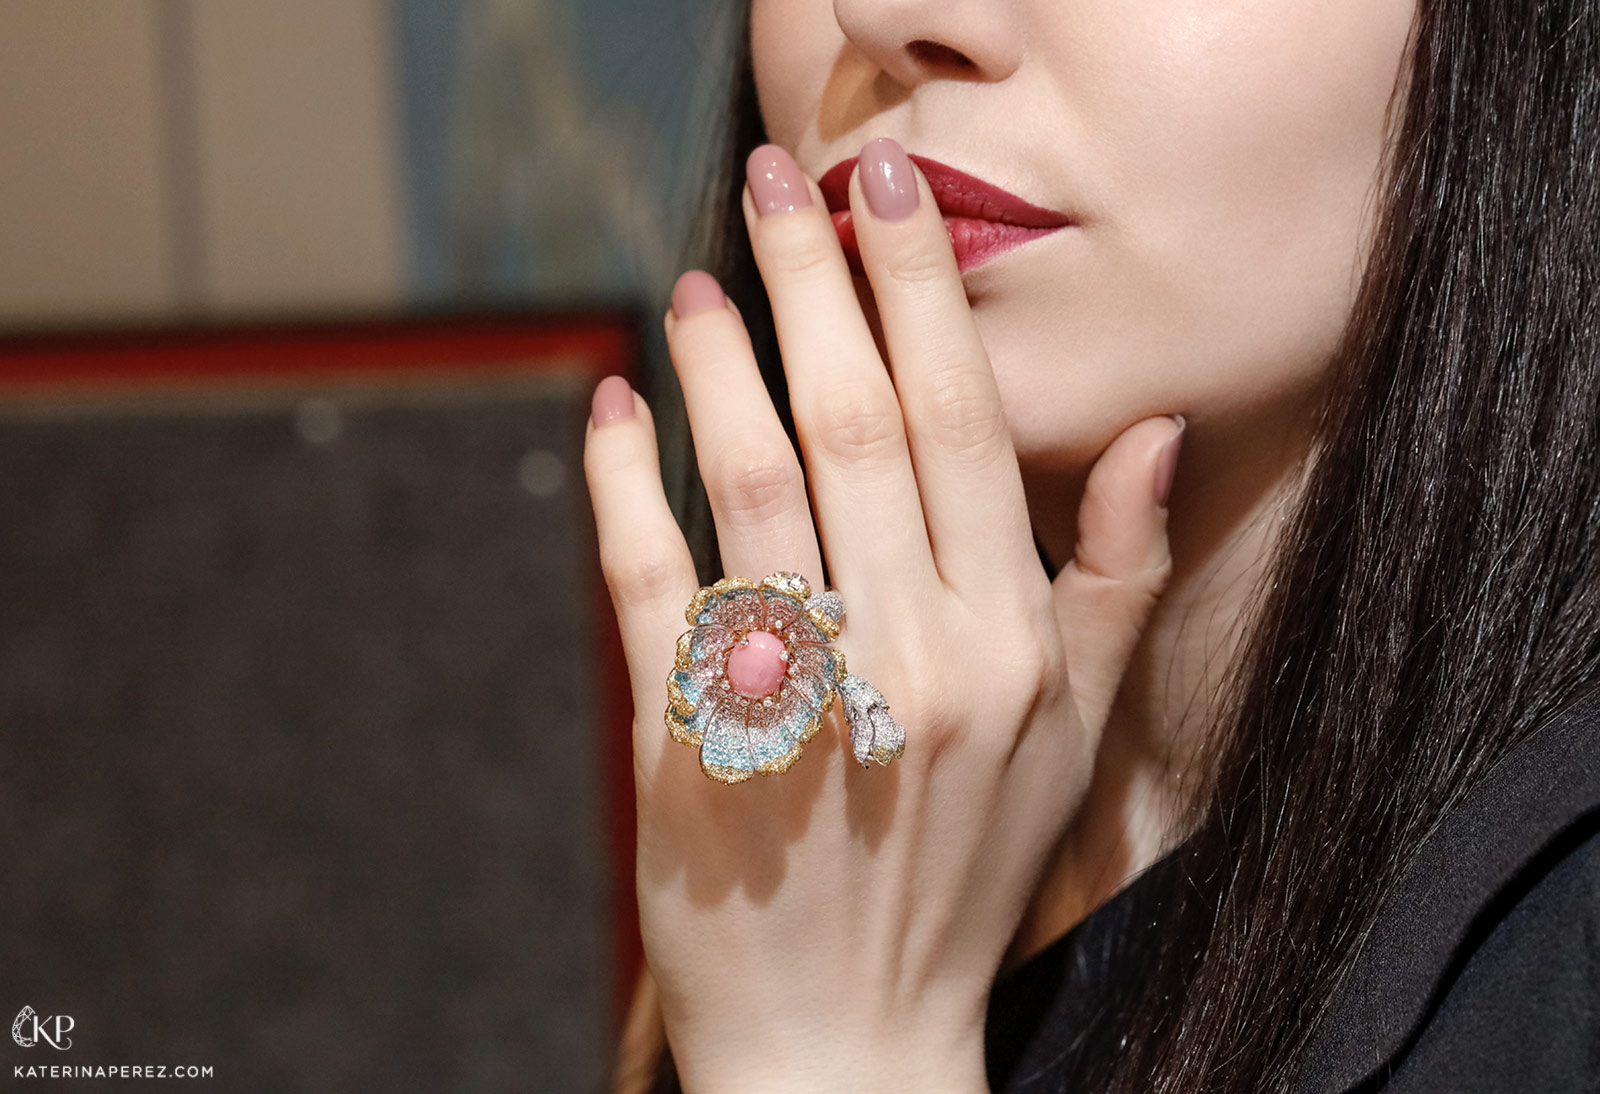 The Gerbera flower ring with conch pearl by Alessio Boschi